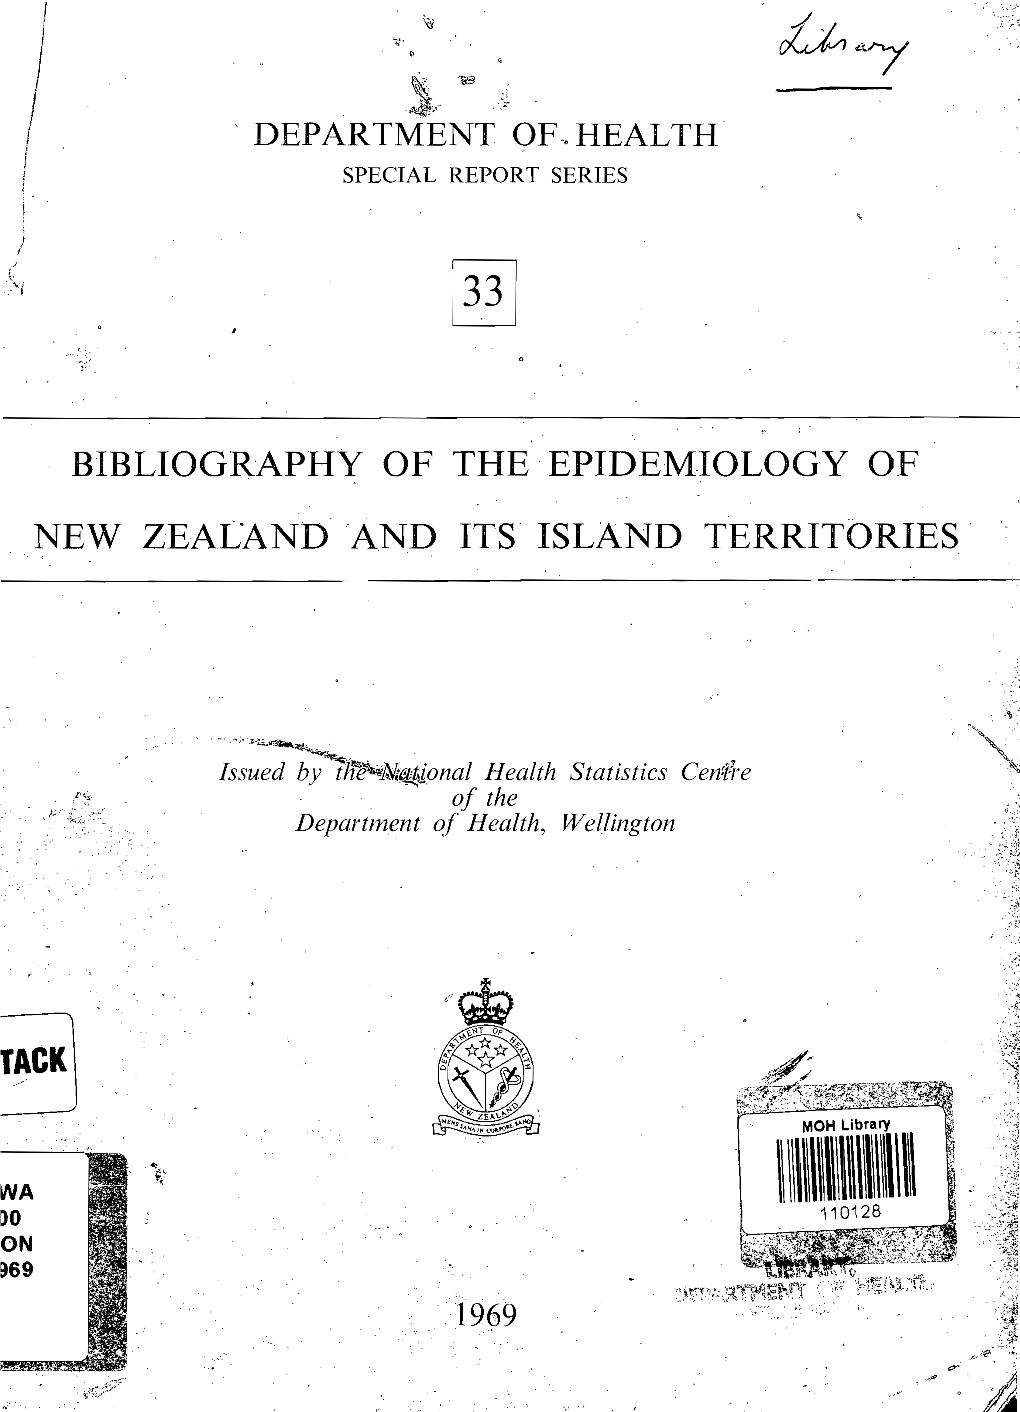 Epidemiology of New Zealand and Its Island Territories